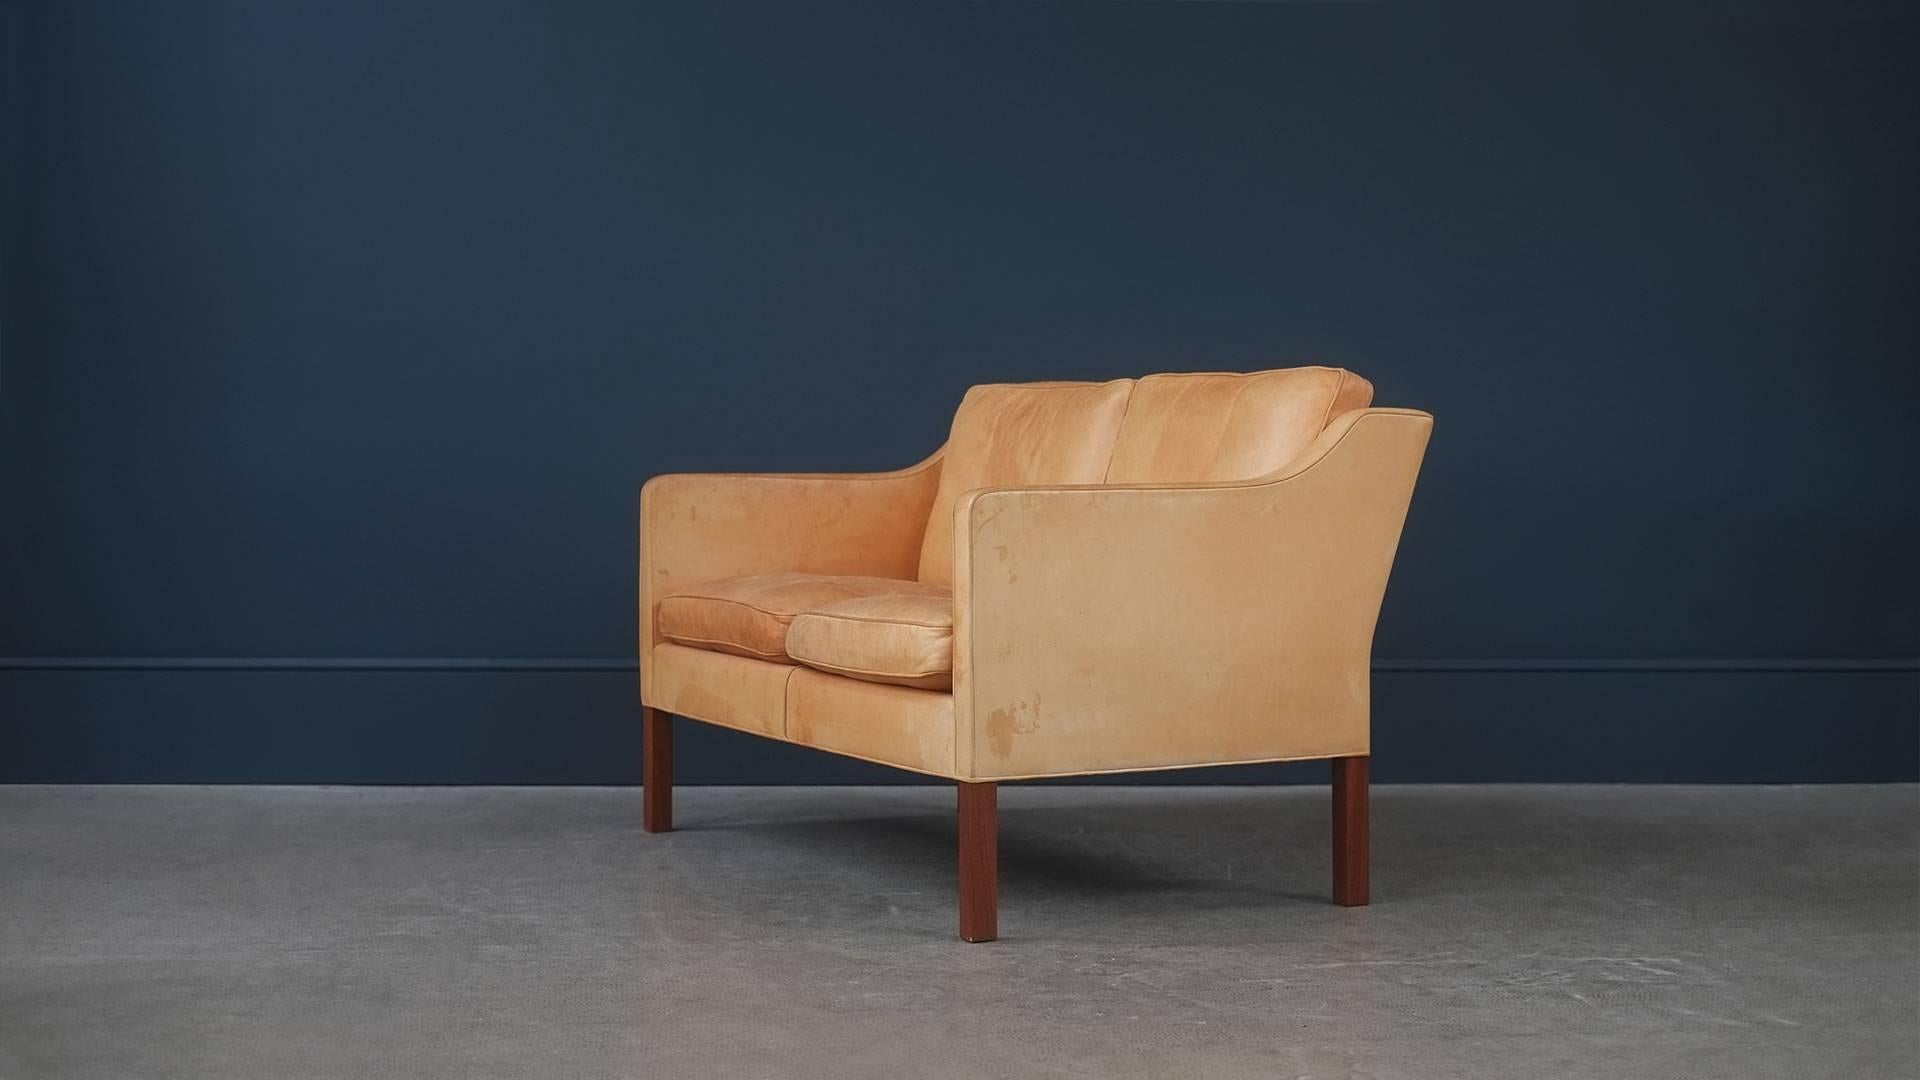 Amazing original sofa, model 2322, designed by Børge Mogensen for Fredericia Stolefabrik, Denmark. This example in rarer natural leather with wonderful patina and contrasting teak legs. Matching lounge chairs available. Superb.